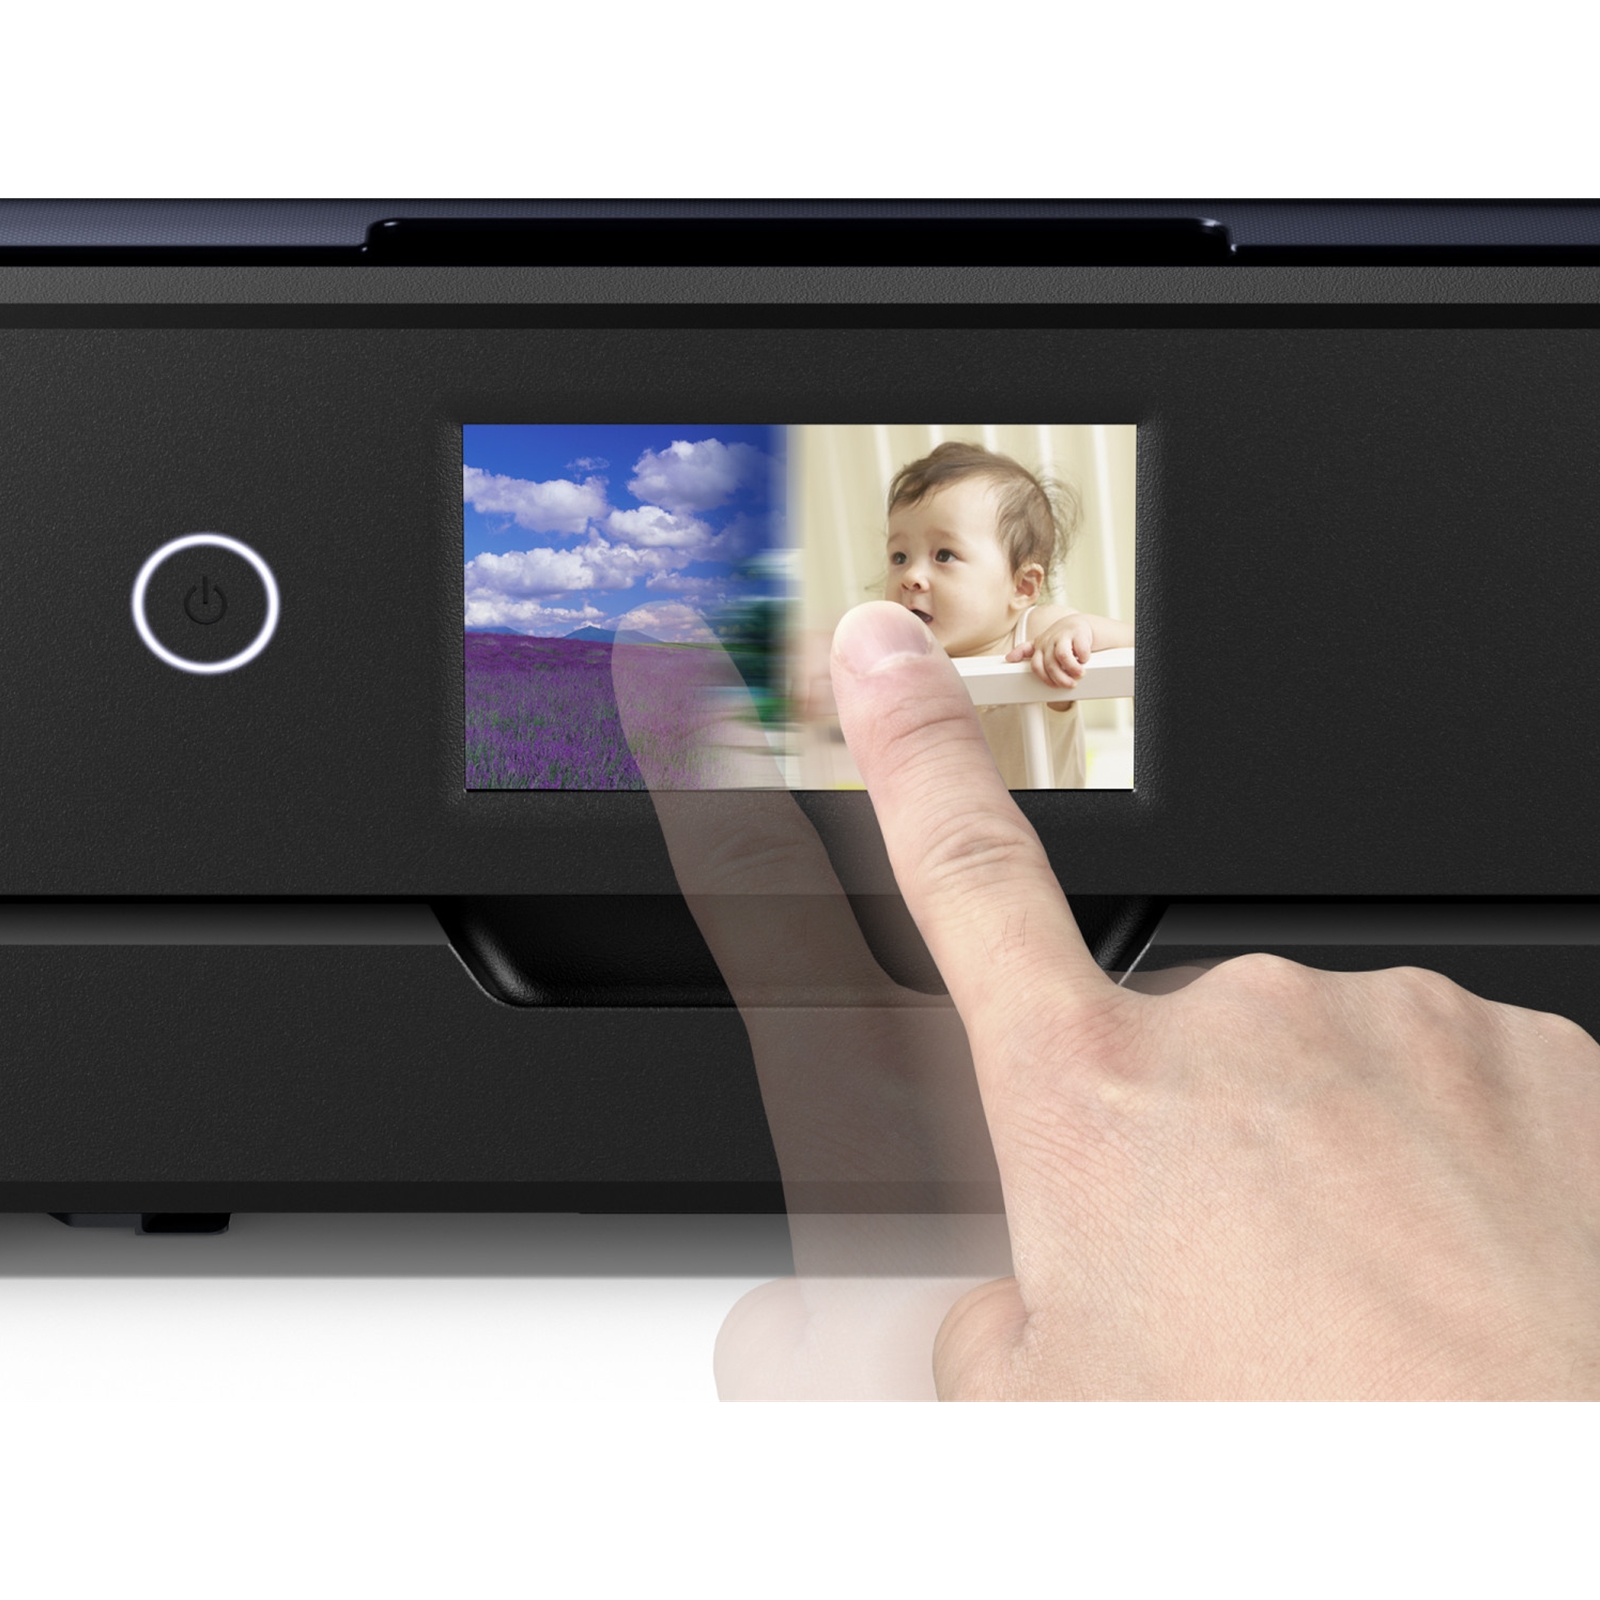 Epson Expression Photo C11CH45401 XP-970 Inkjet Printer, A4 and up to A3, Wireless, Ethernet, All-in-One, Colour, 10.9cm Touchscreen, Duplex